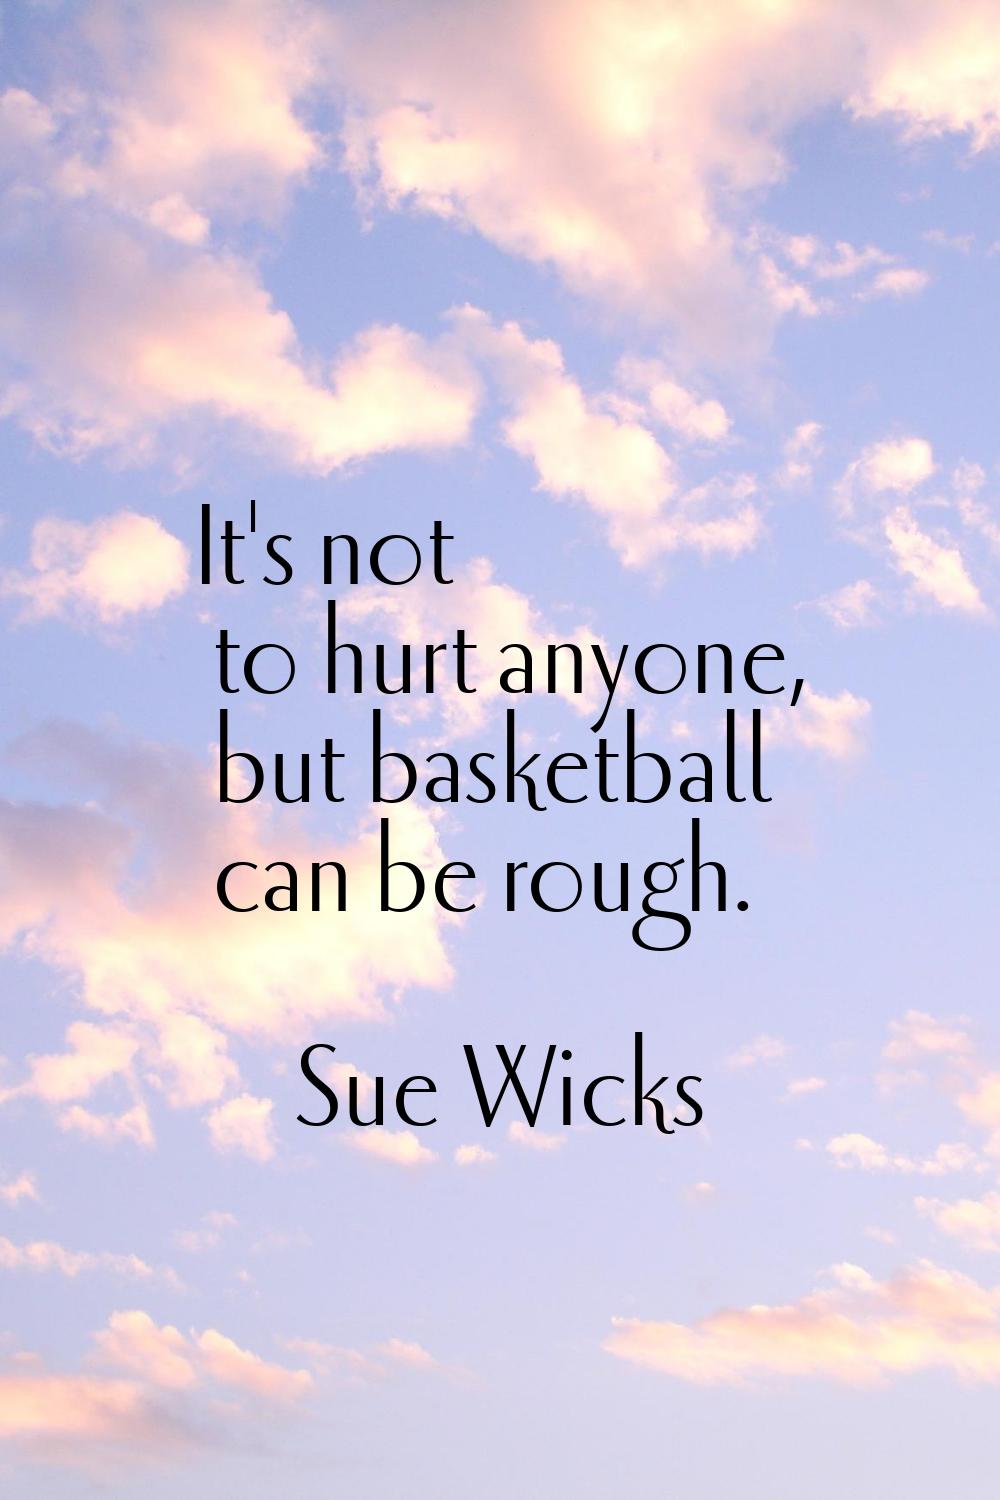 It's not to hurt anyone, but basketball can be rough.